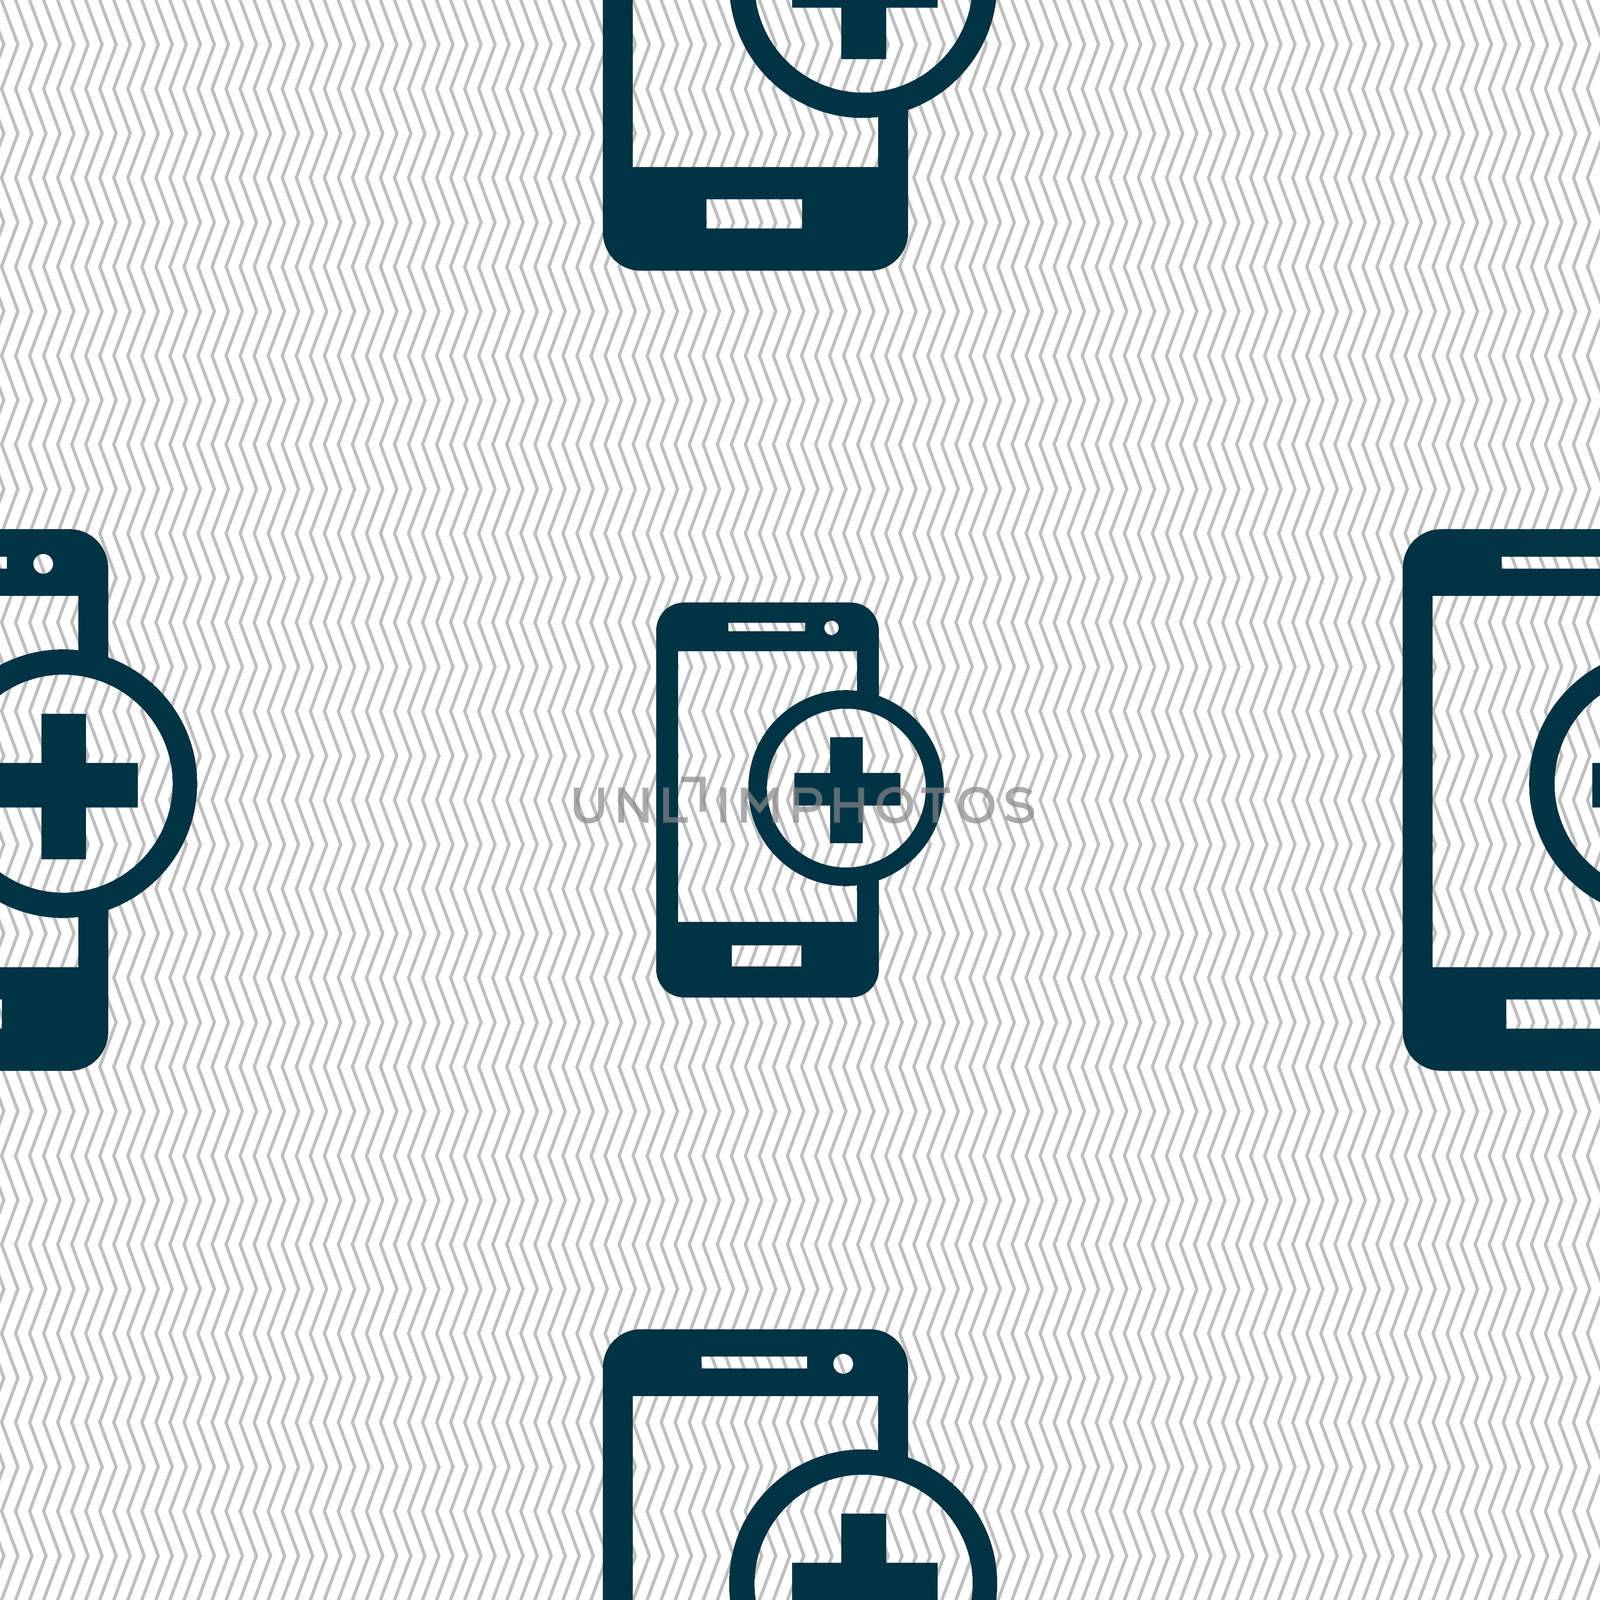 Mobile devices sign icon. with symbol plus. Seamless abstract background with geometric shapes. illustration